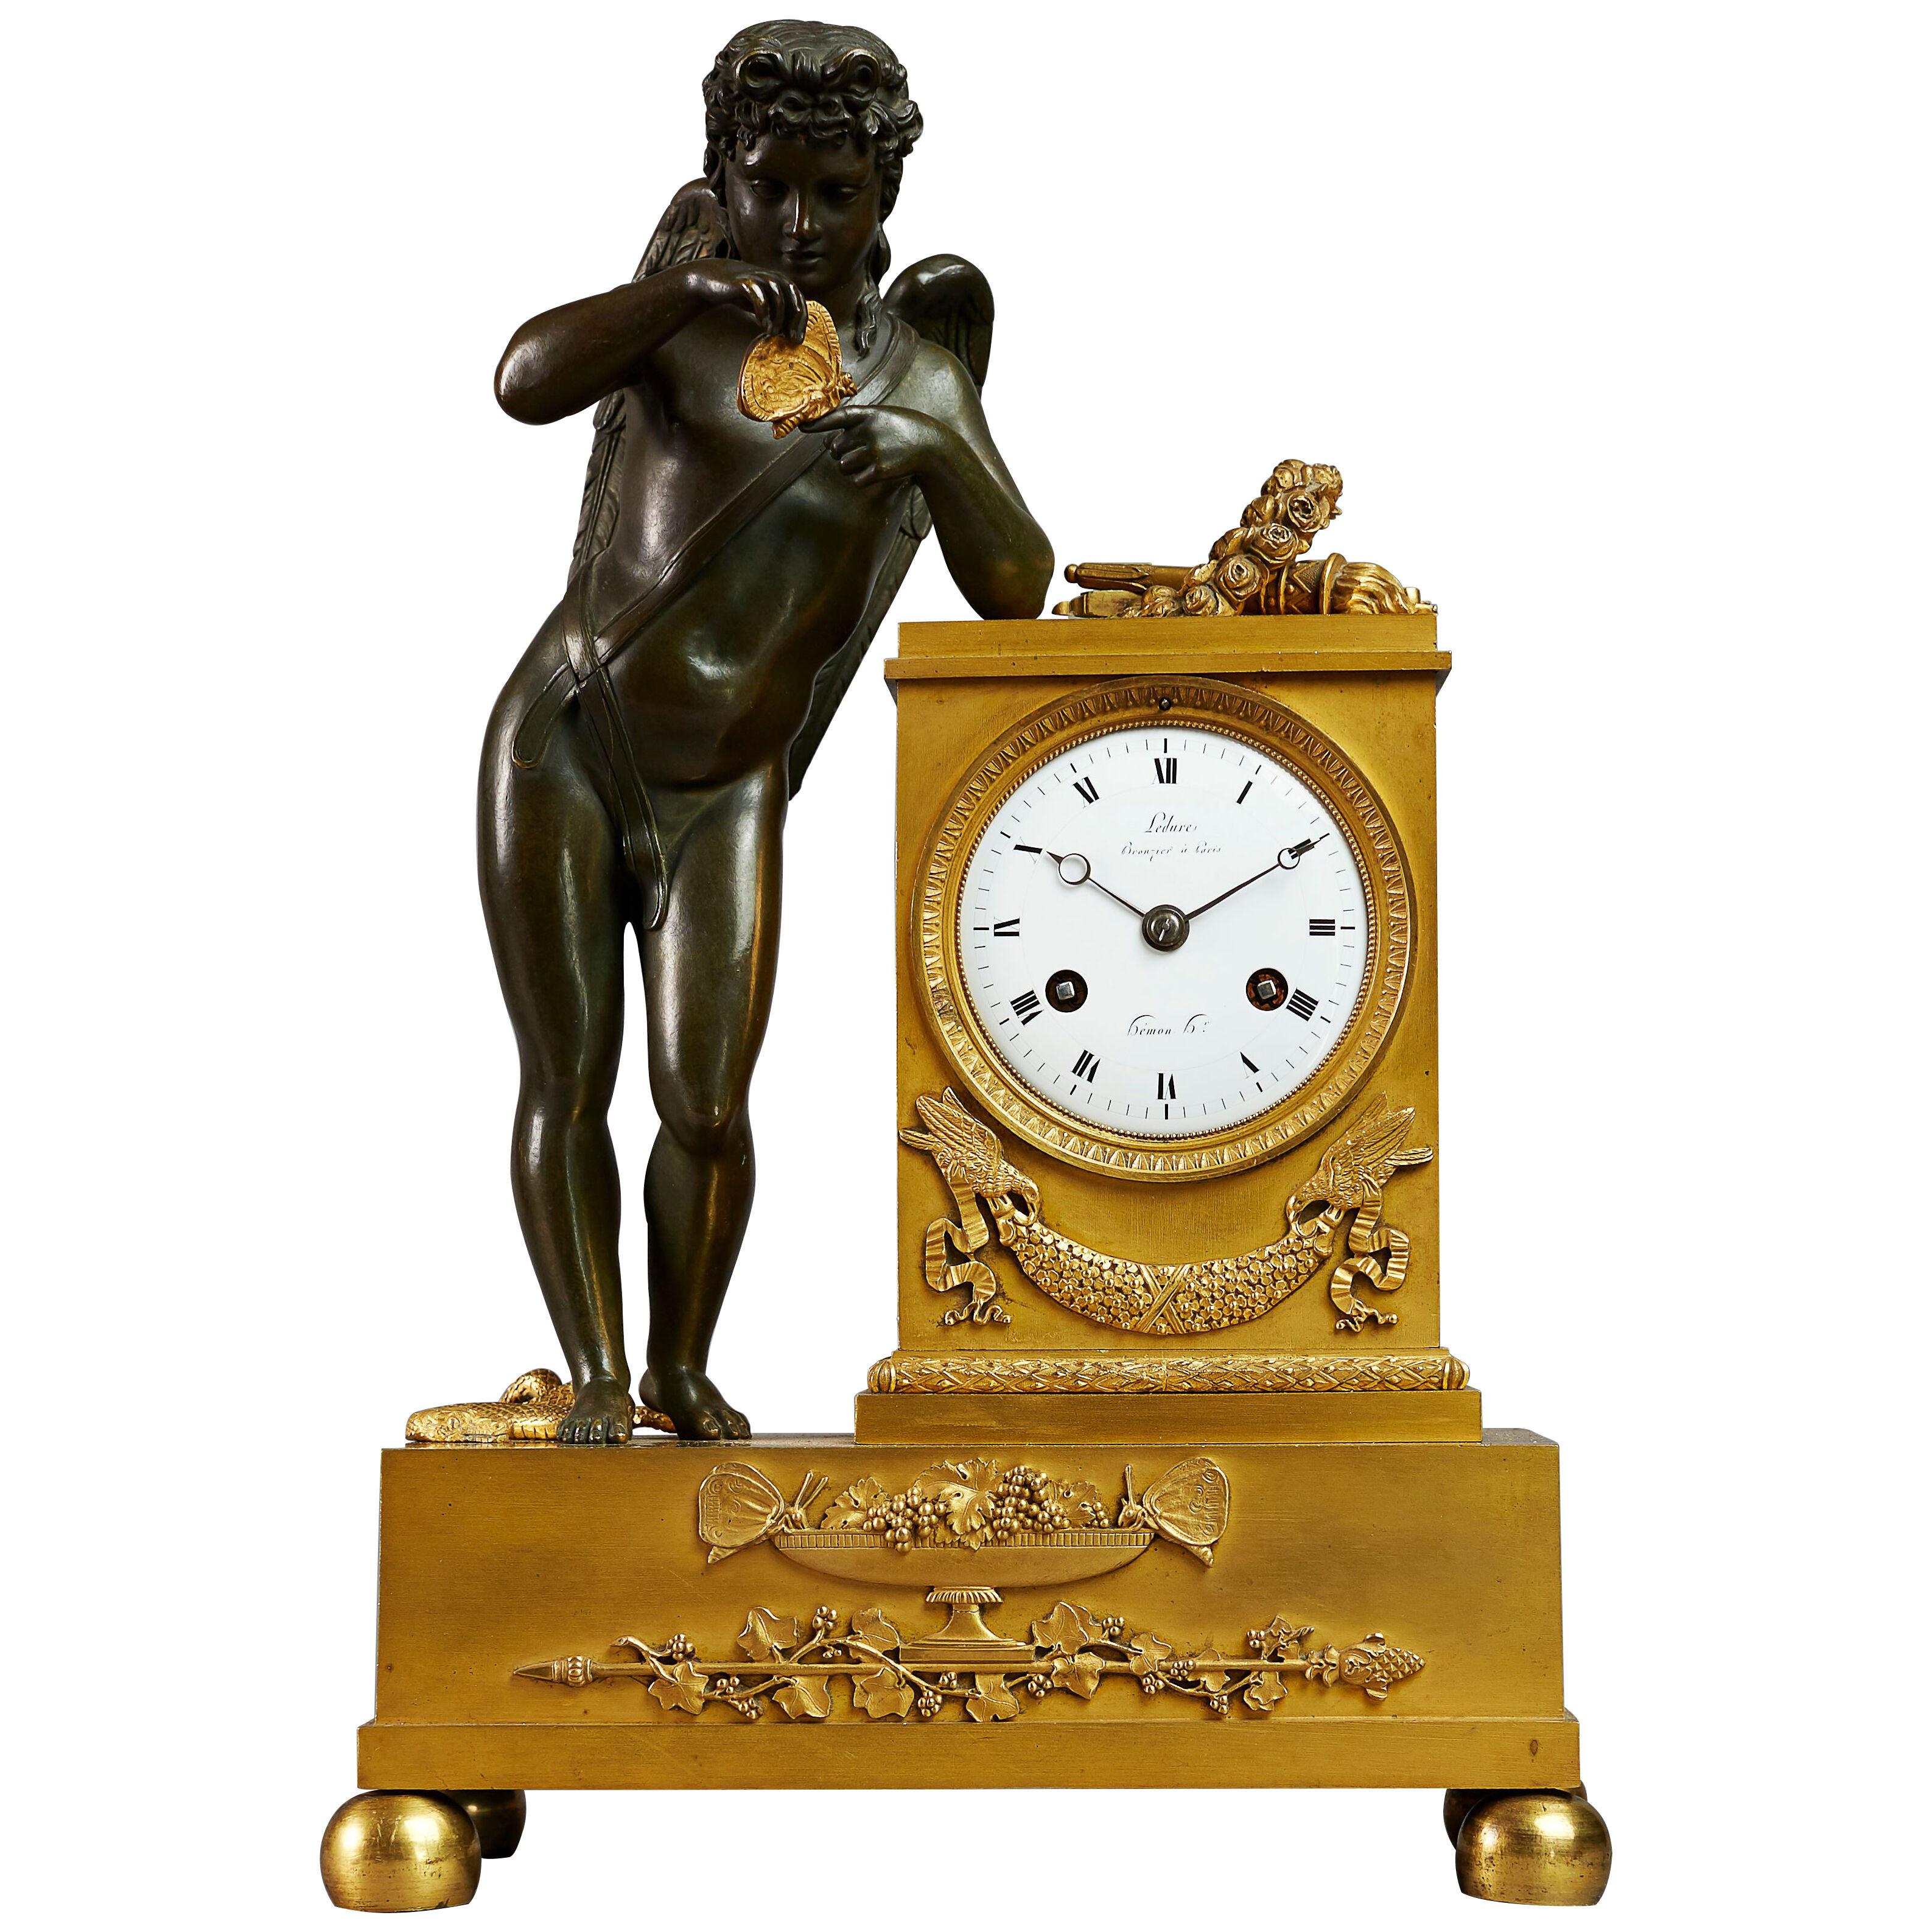 Early 19th Century Empire Mantel Clock by Ledure with Apollo or Eros